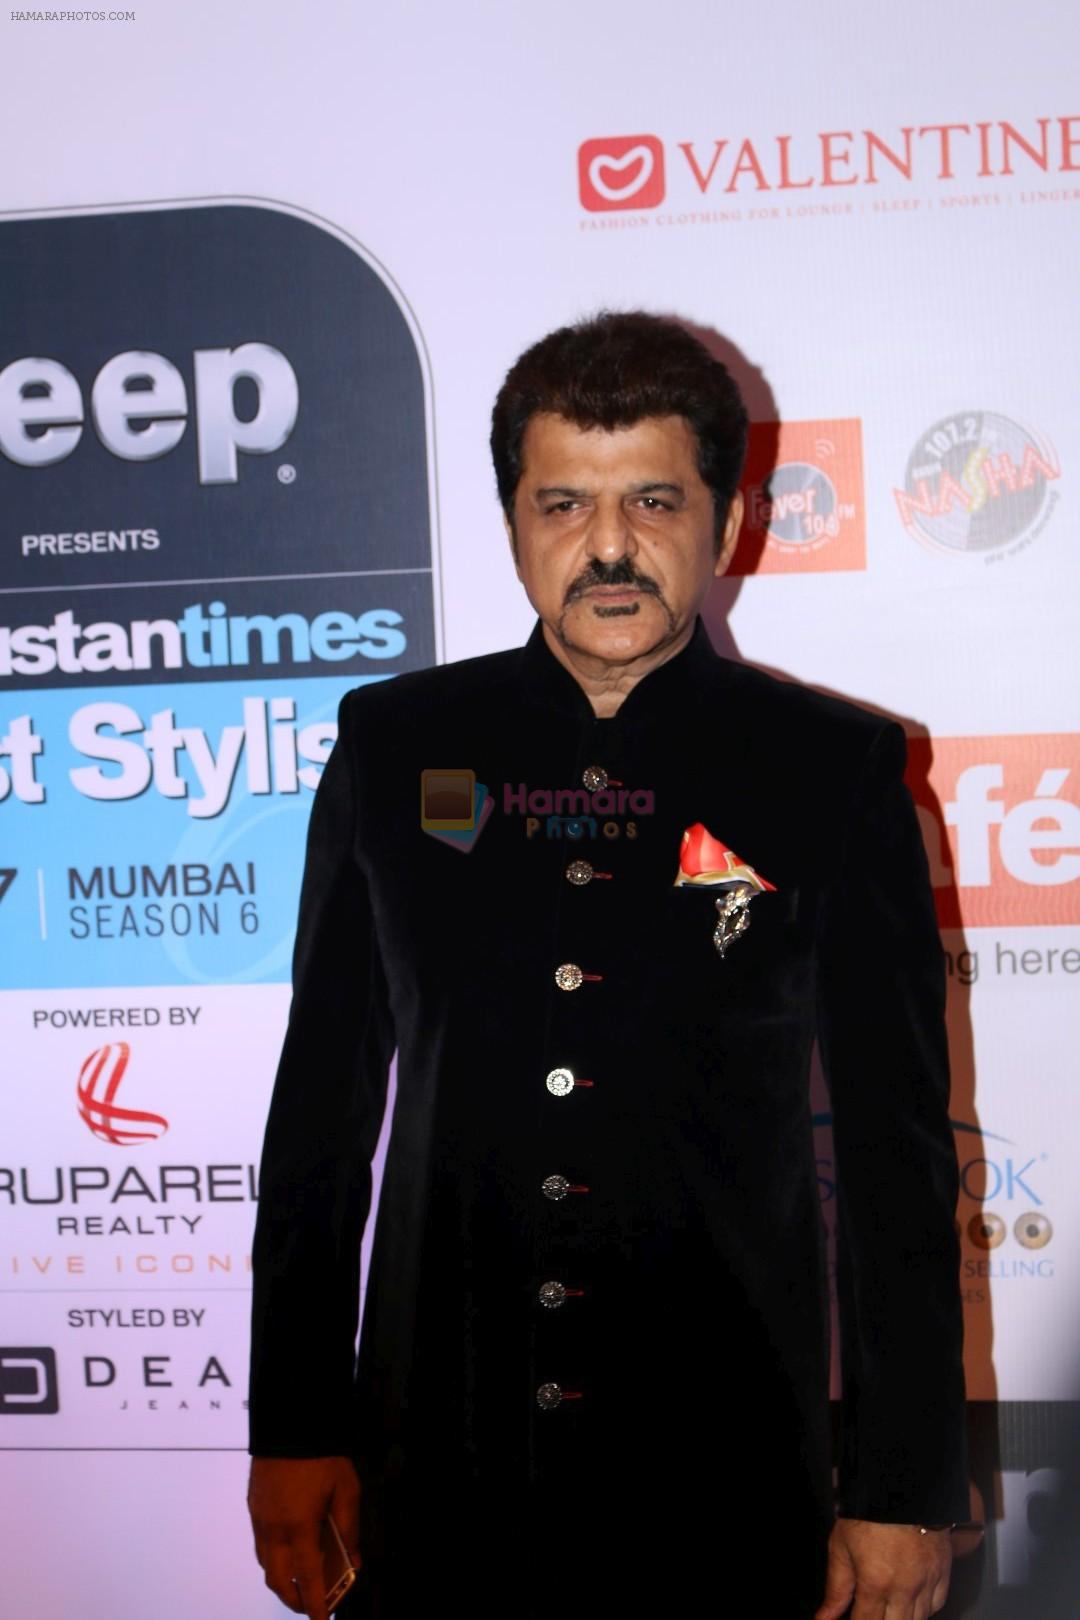 Rajesh Khattar at the Red Carpet Of Most Stylish Awards 2017 on 24th March 2017